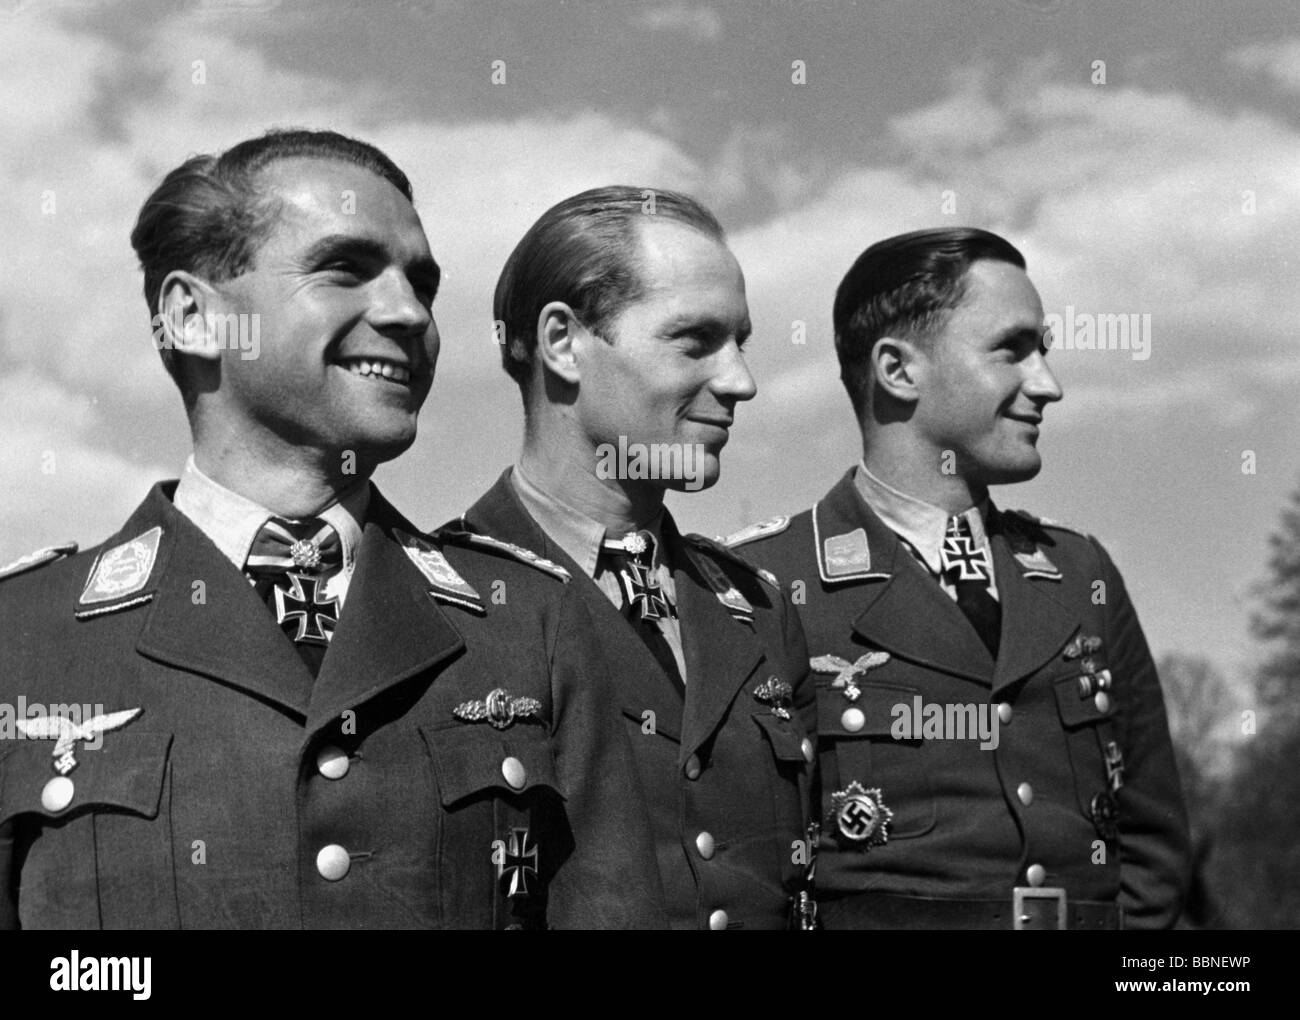 events, Second World War / WWII, aerial warfare, persons, Luftwaffe officers, Kampfgeschwader (bomber wing) 6, Creil, France, 13.4.1943, from left to right: Oberstleutnant (lieutenant colonel) Walter Storp (wing commander), Major Hermann Hogeback (group commander), Oberleutnant (first lieutenant) Rudolf Puchinger (squadron leader), Third Reich, uniform, uniforms, Wehrmacht, officer, soldier, soldiers, pilot, pilots, holder of the Knight's Cross with oak leaves, oakleaves, holders, medal, medals, KG, half length, smiling, laughing, propaganda photo, 20th century, Stock Photo